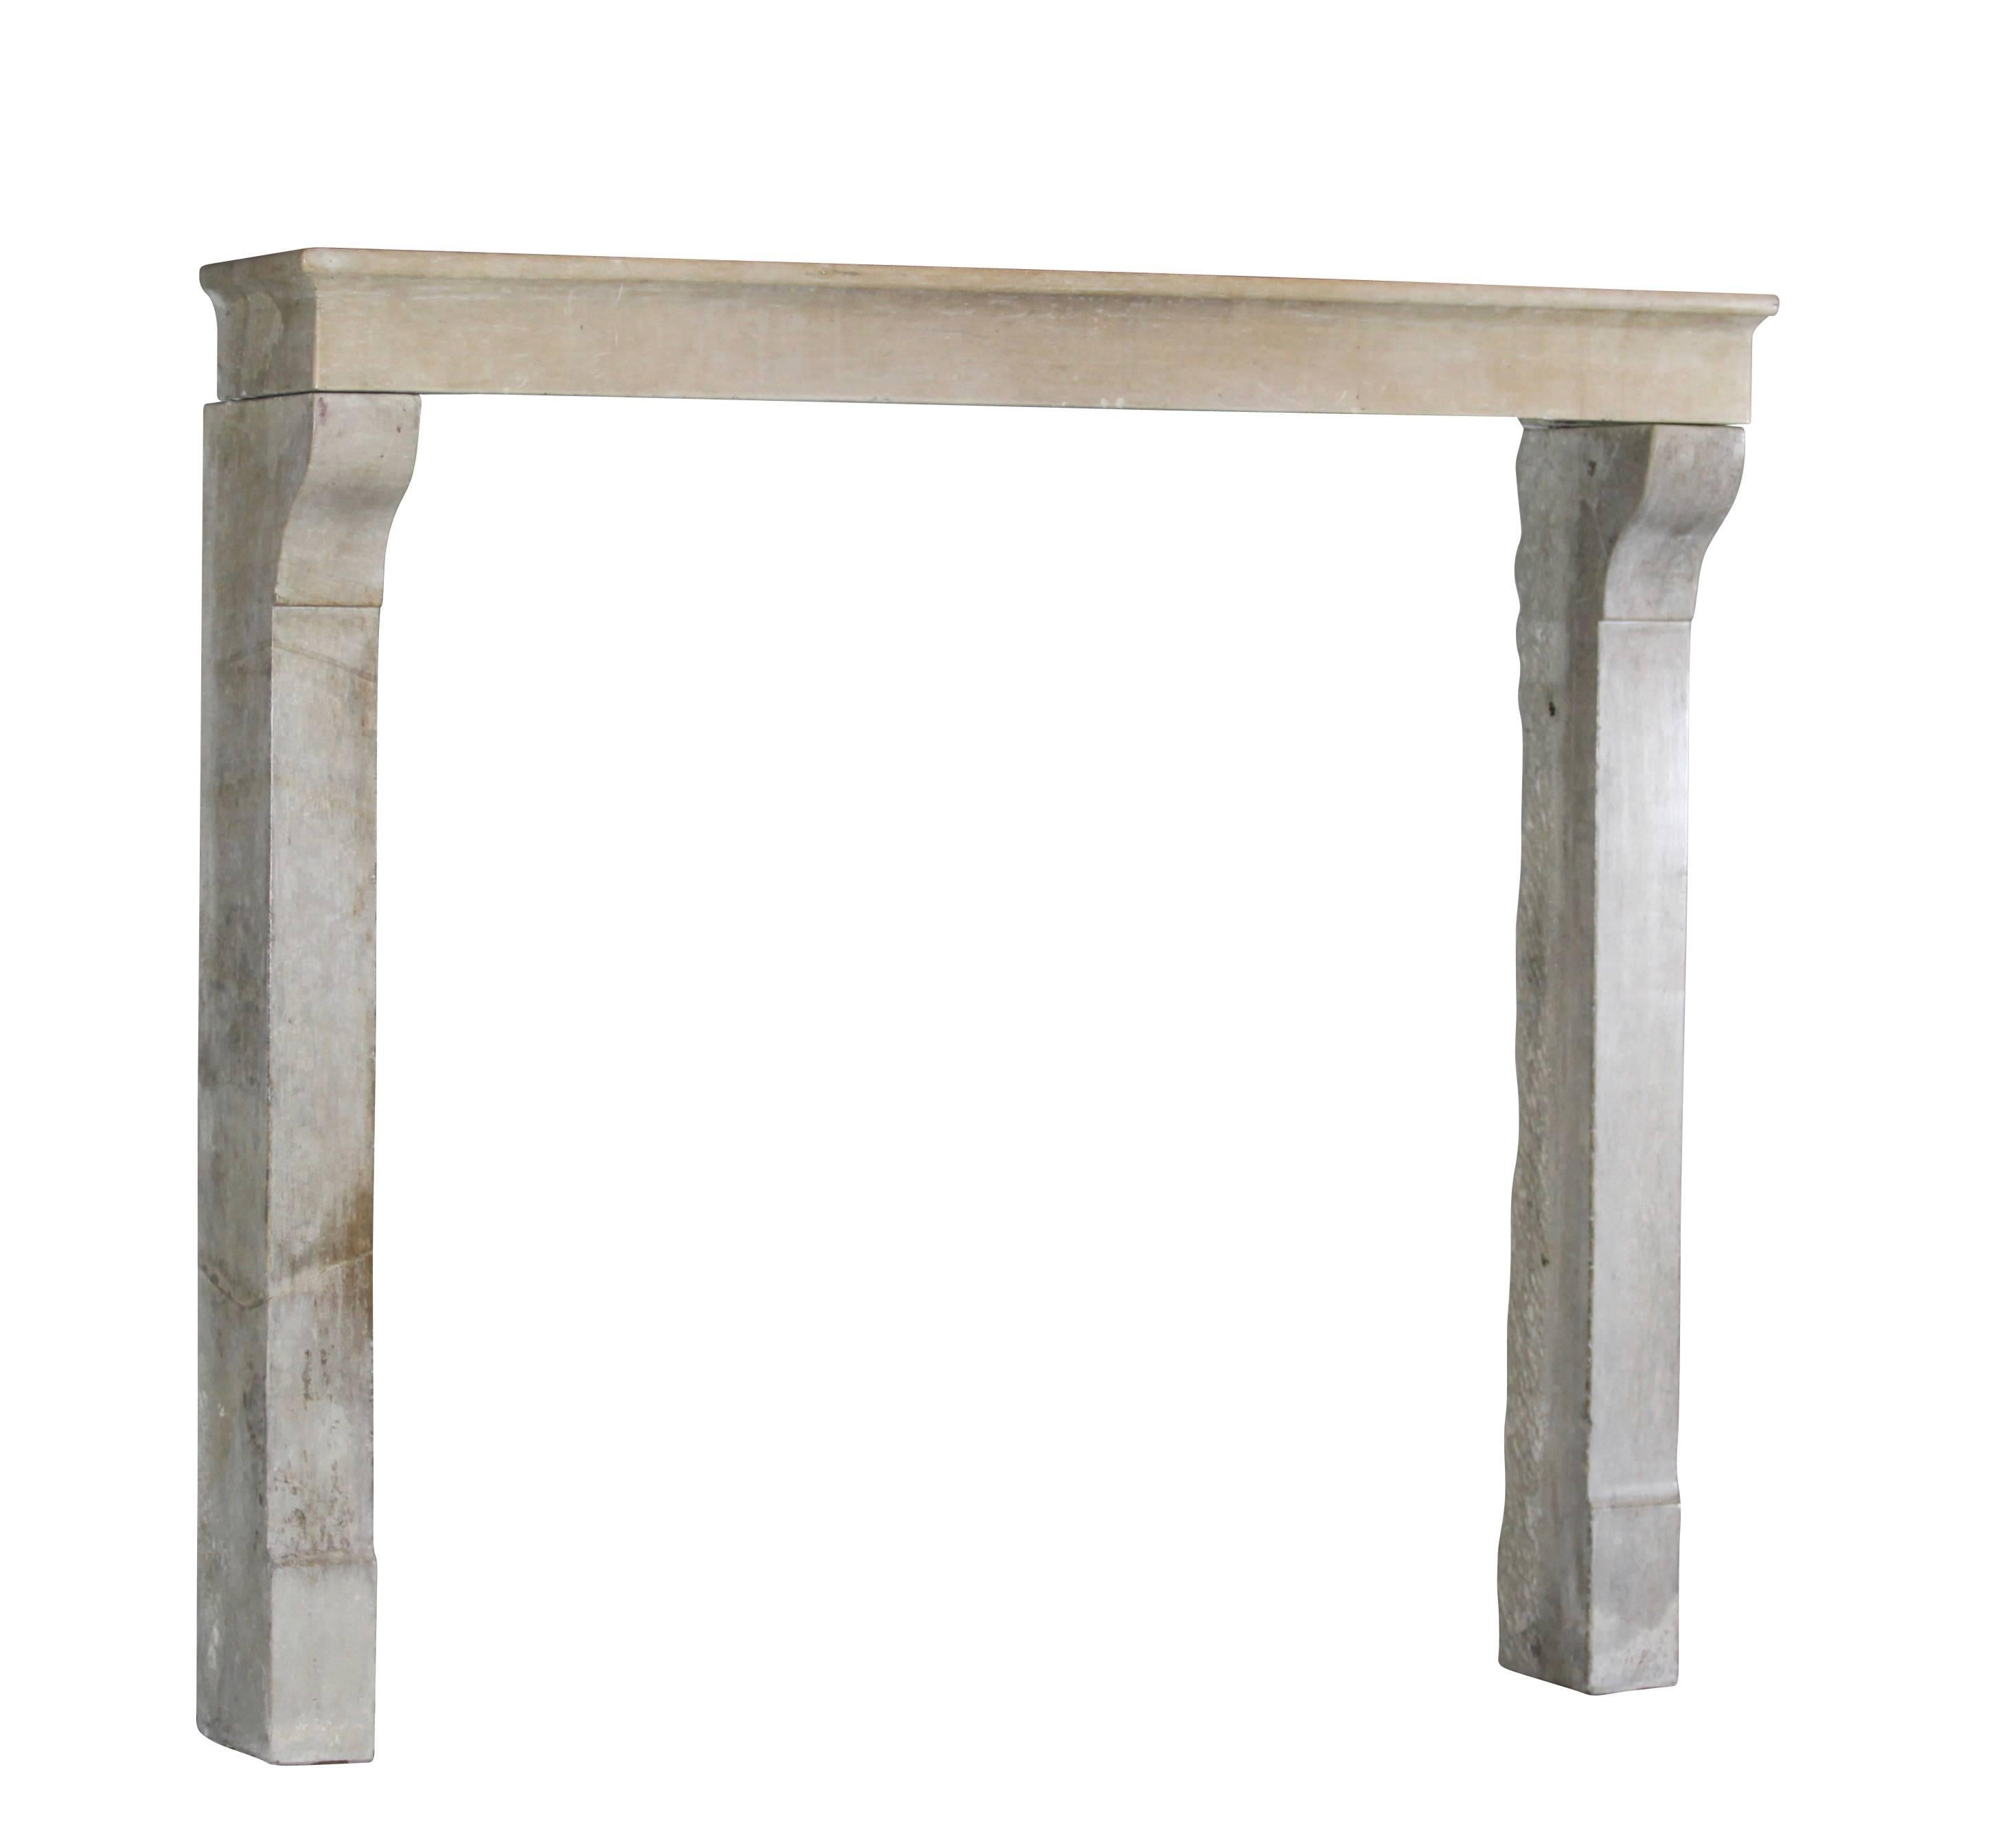 Antique rustic and country but elegant fireplace surround in limestone from the Alsace region. 
Had a restoration on the legs.
Measures:
145 cm Exterior Width 57.08 Inch
132 cm Exterior Height 51.96 Inch
121 cm Interior Width 47.63 Inch
120 cm